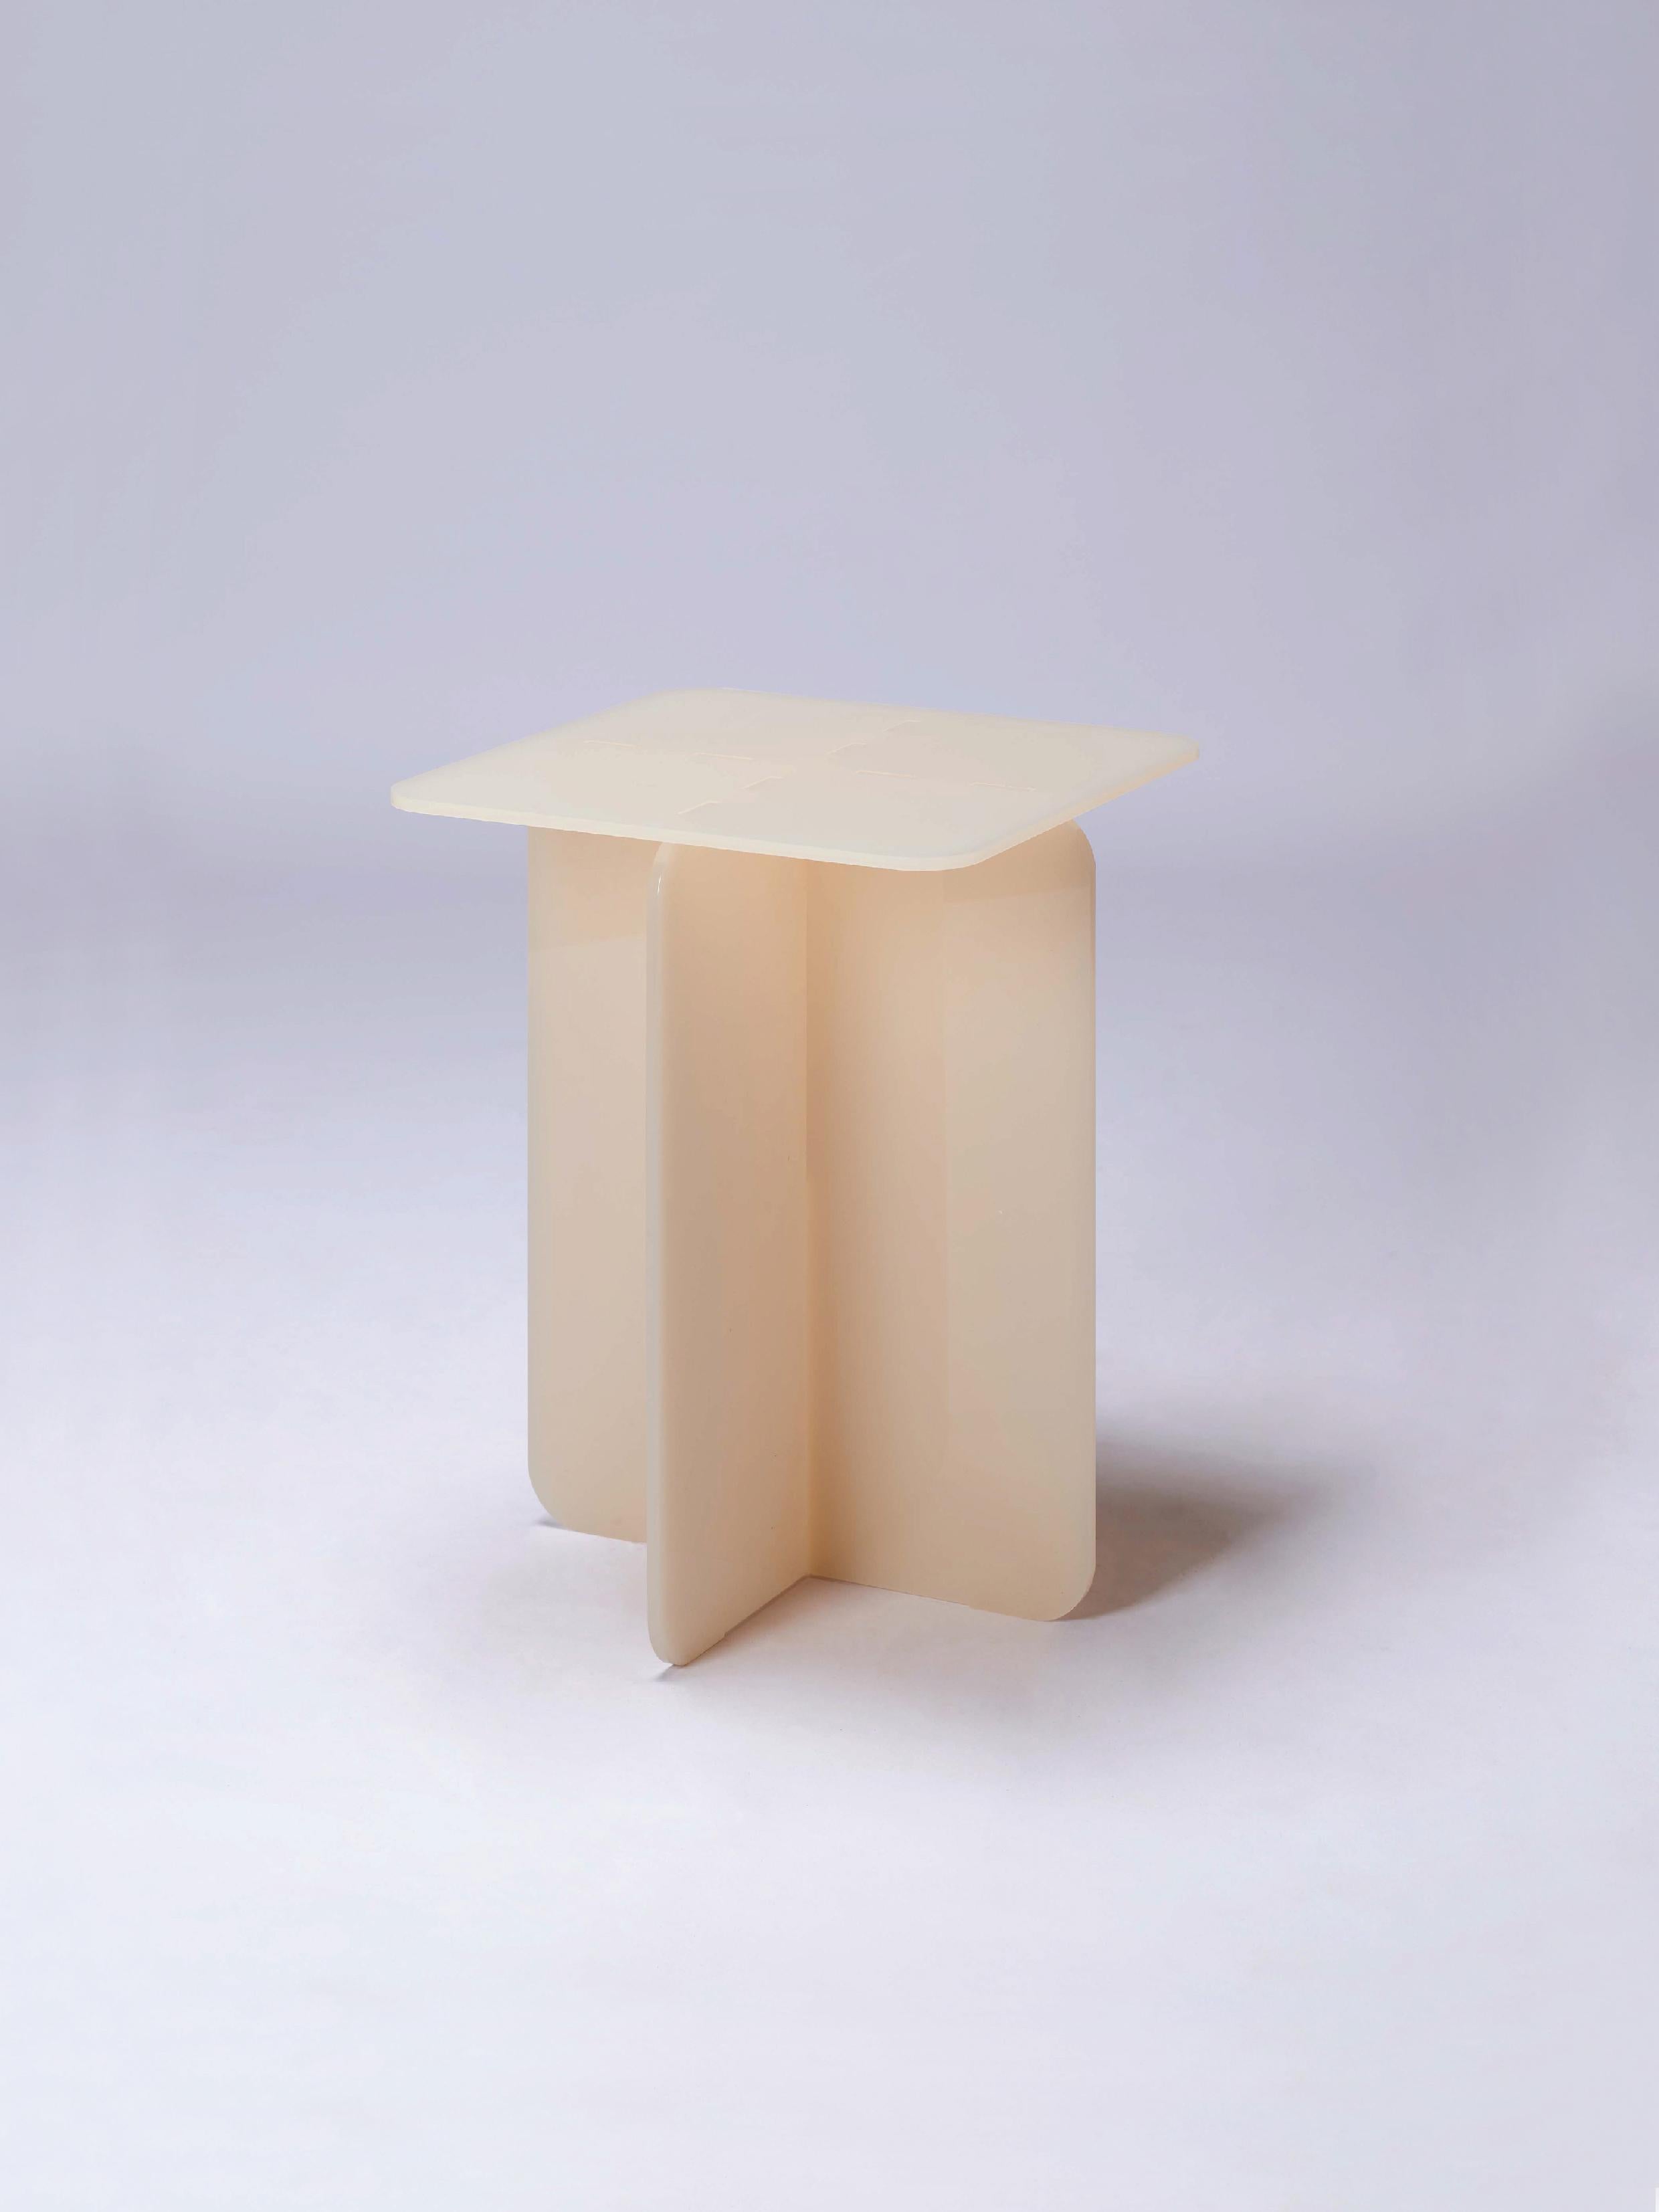 ROMA Table d'appoint Contemporary Acrylic by Ries (Square Top) en vente 5